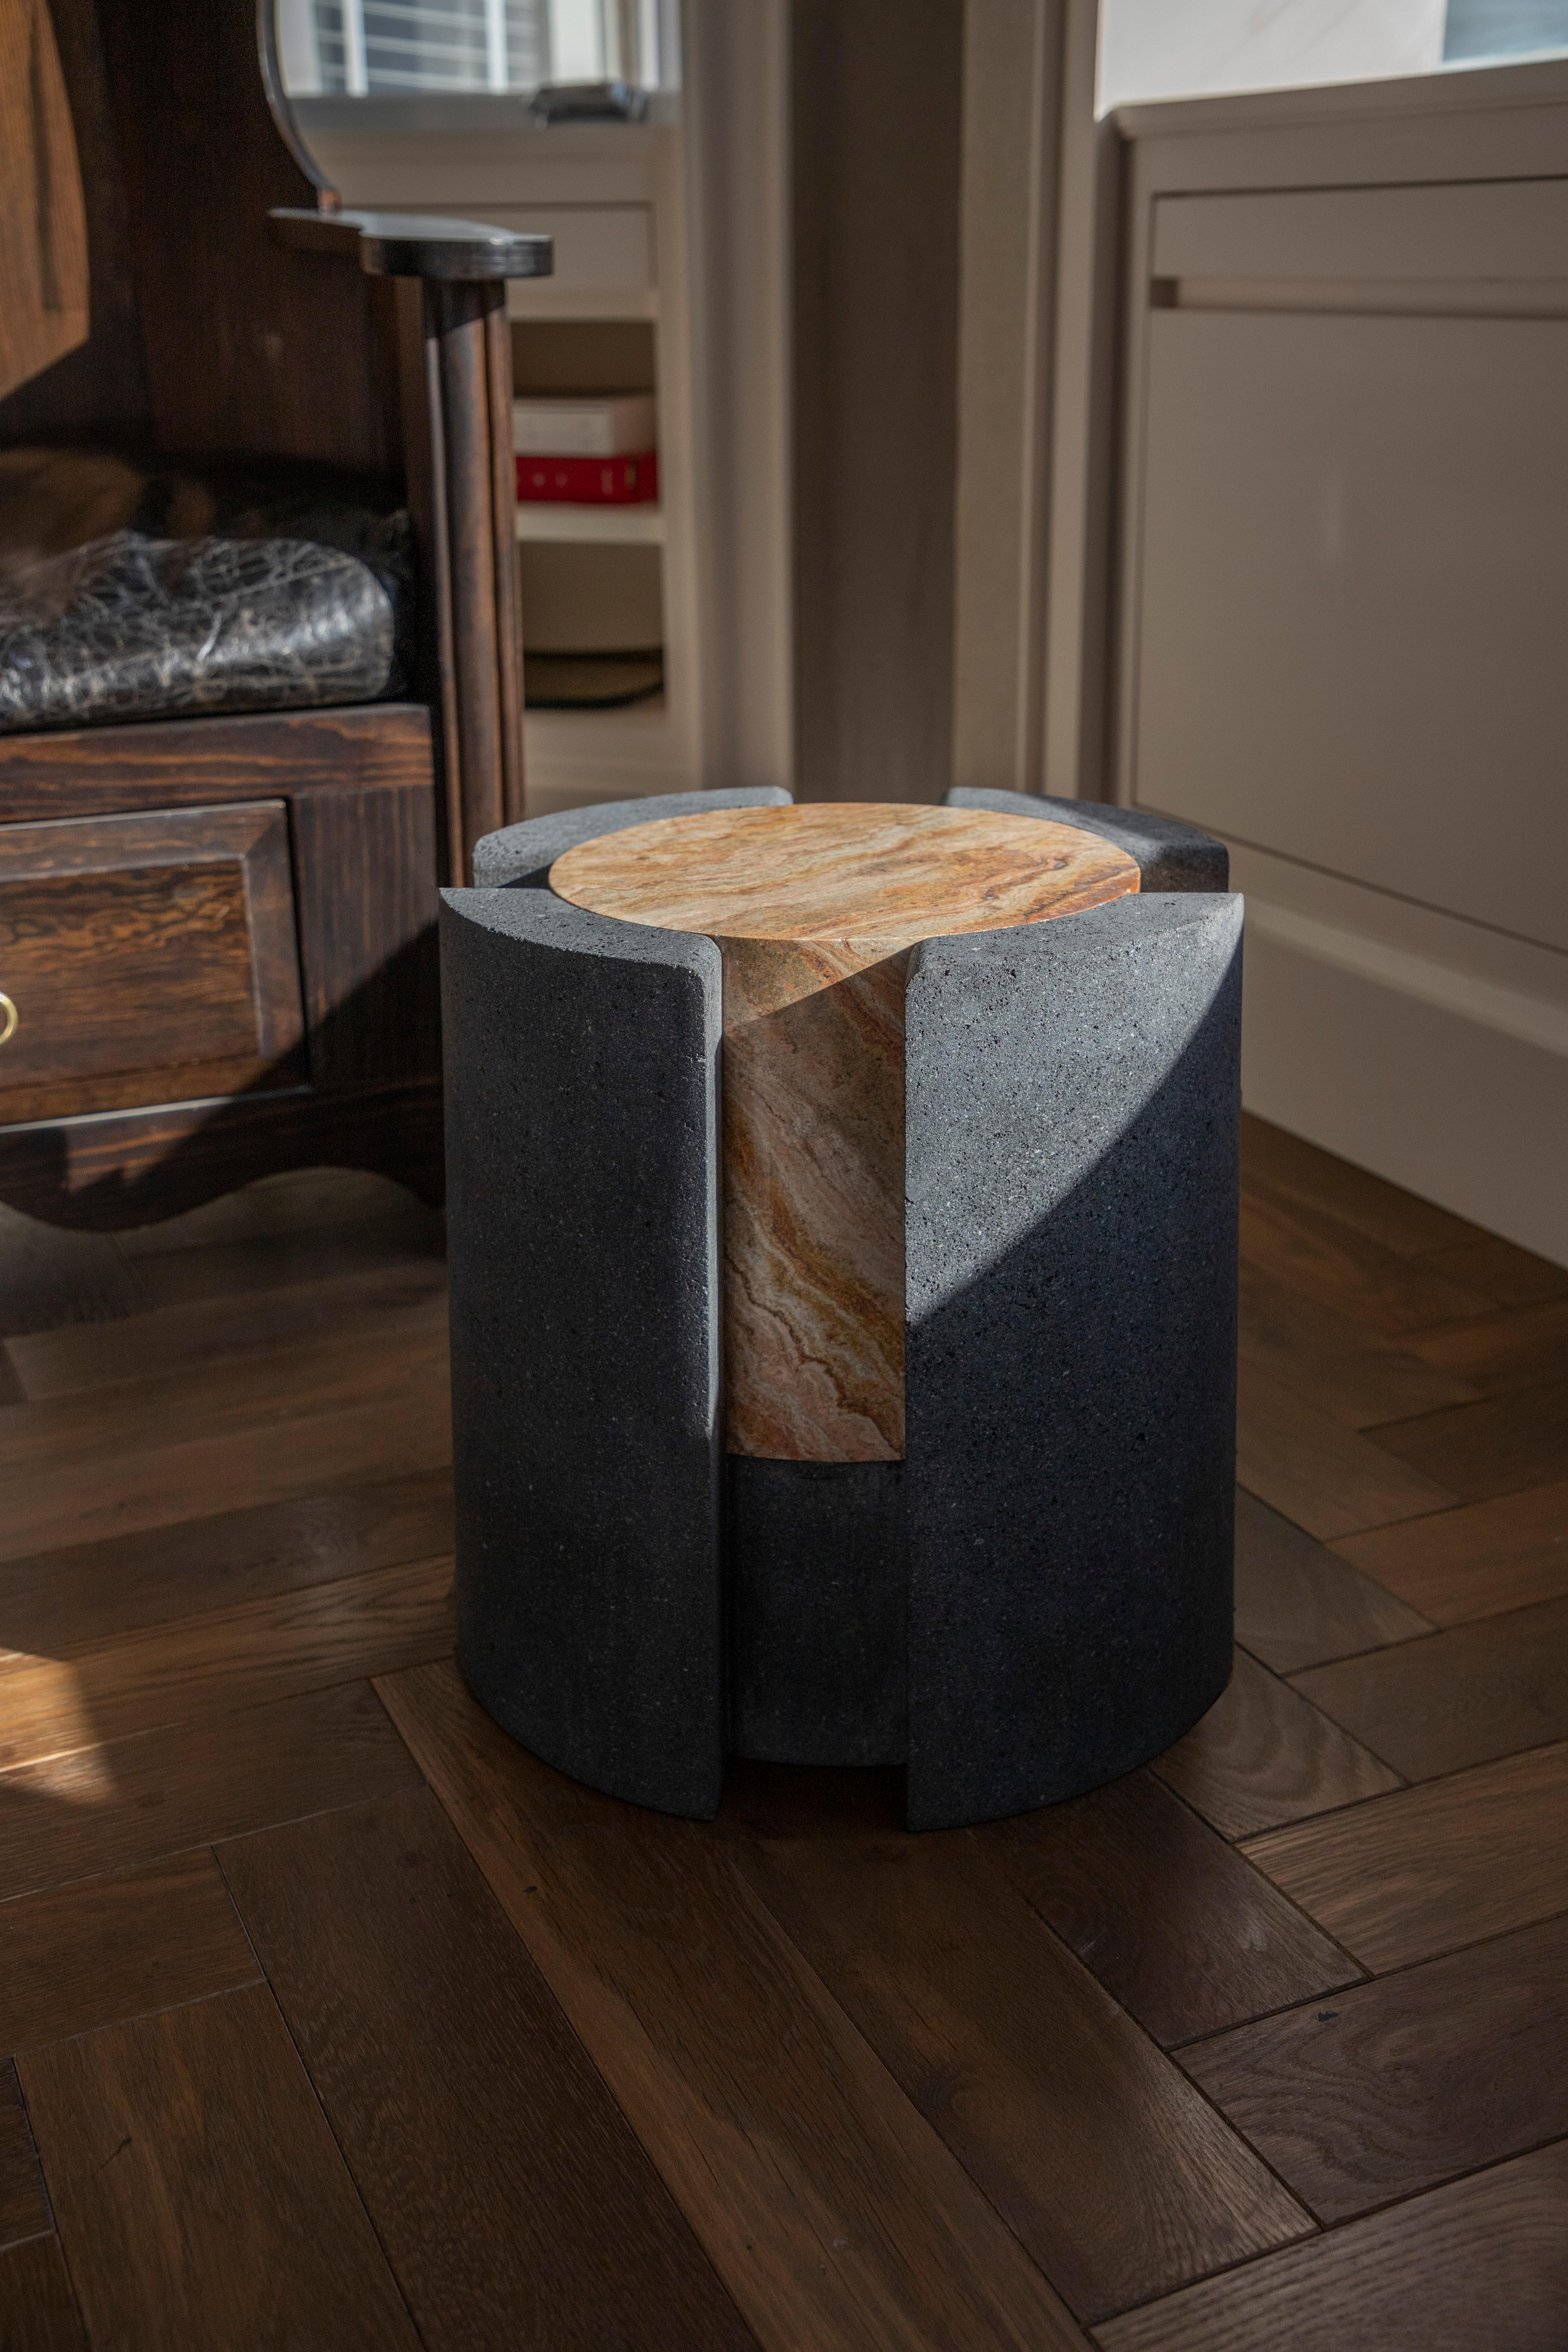 Mexican Volcanic Shade III Stool/Table by Sten Studio, Represented by Tuleste Factory For Sale